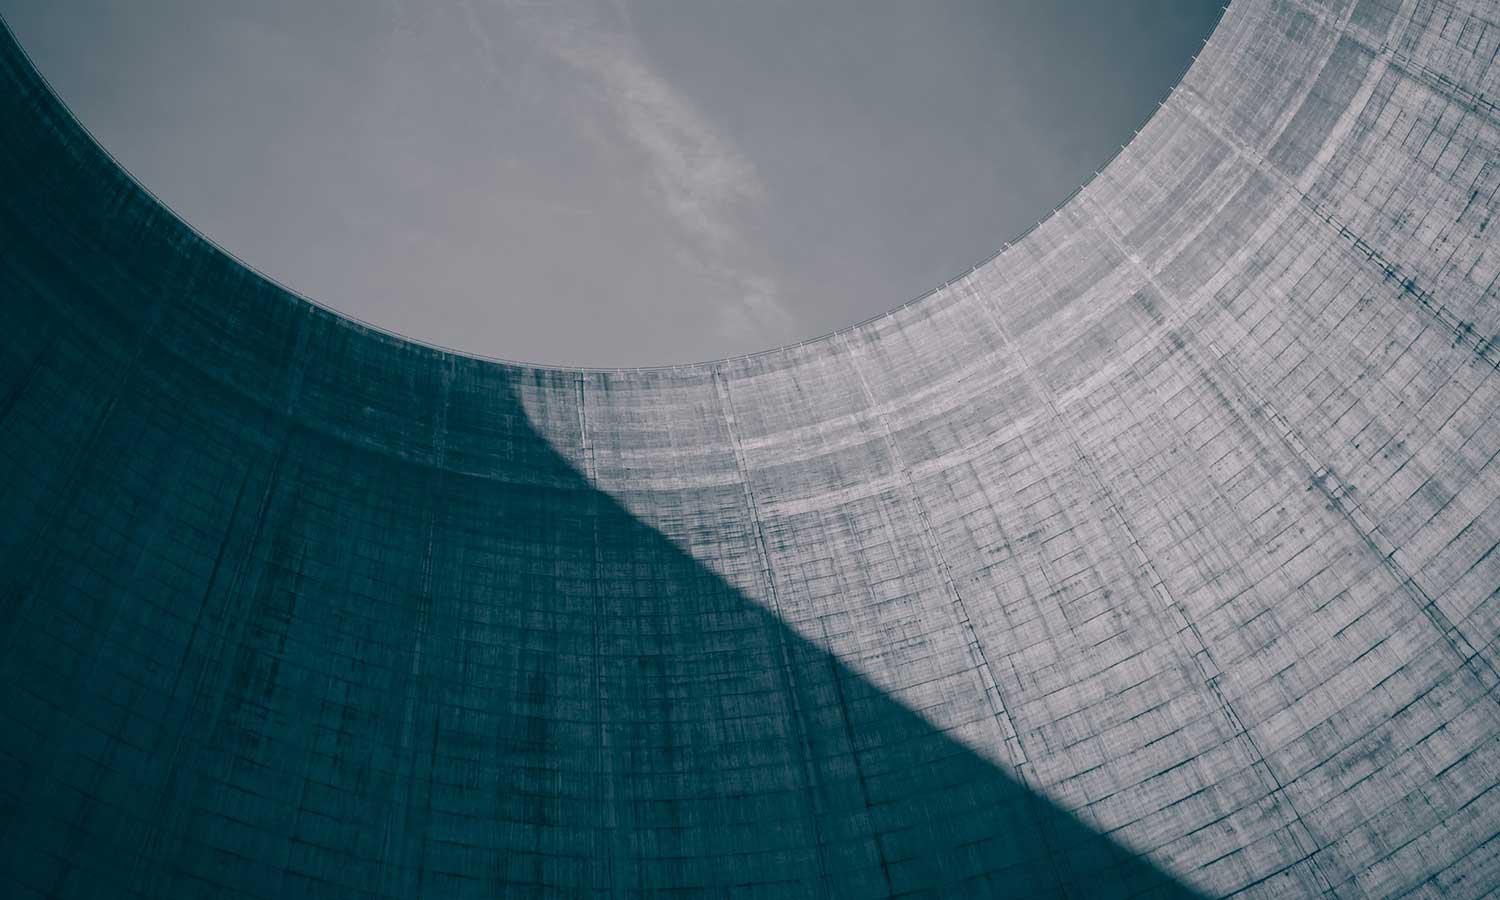 An artsy shot of cooling tower